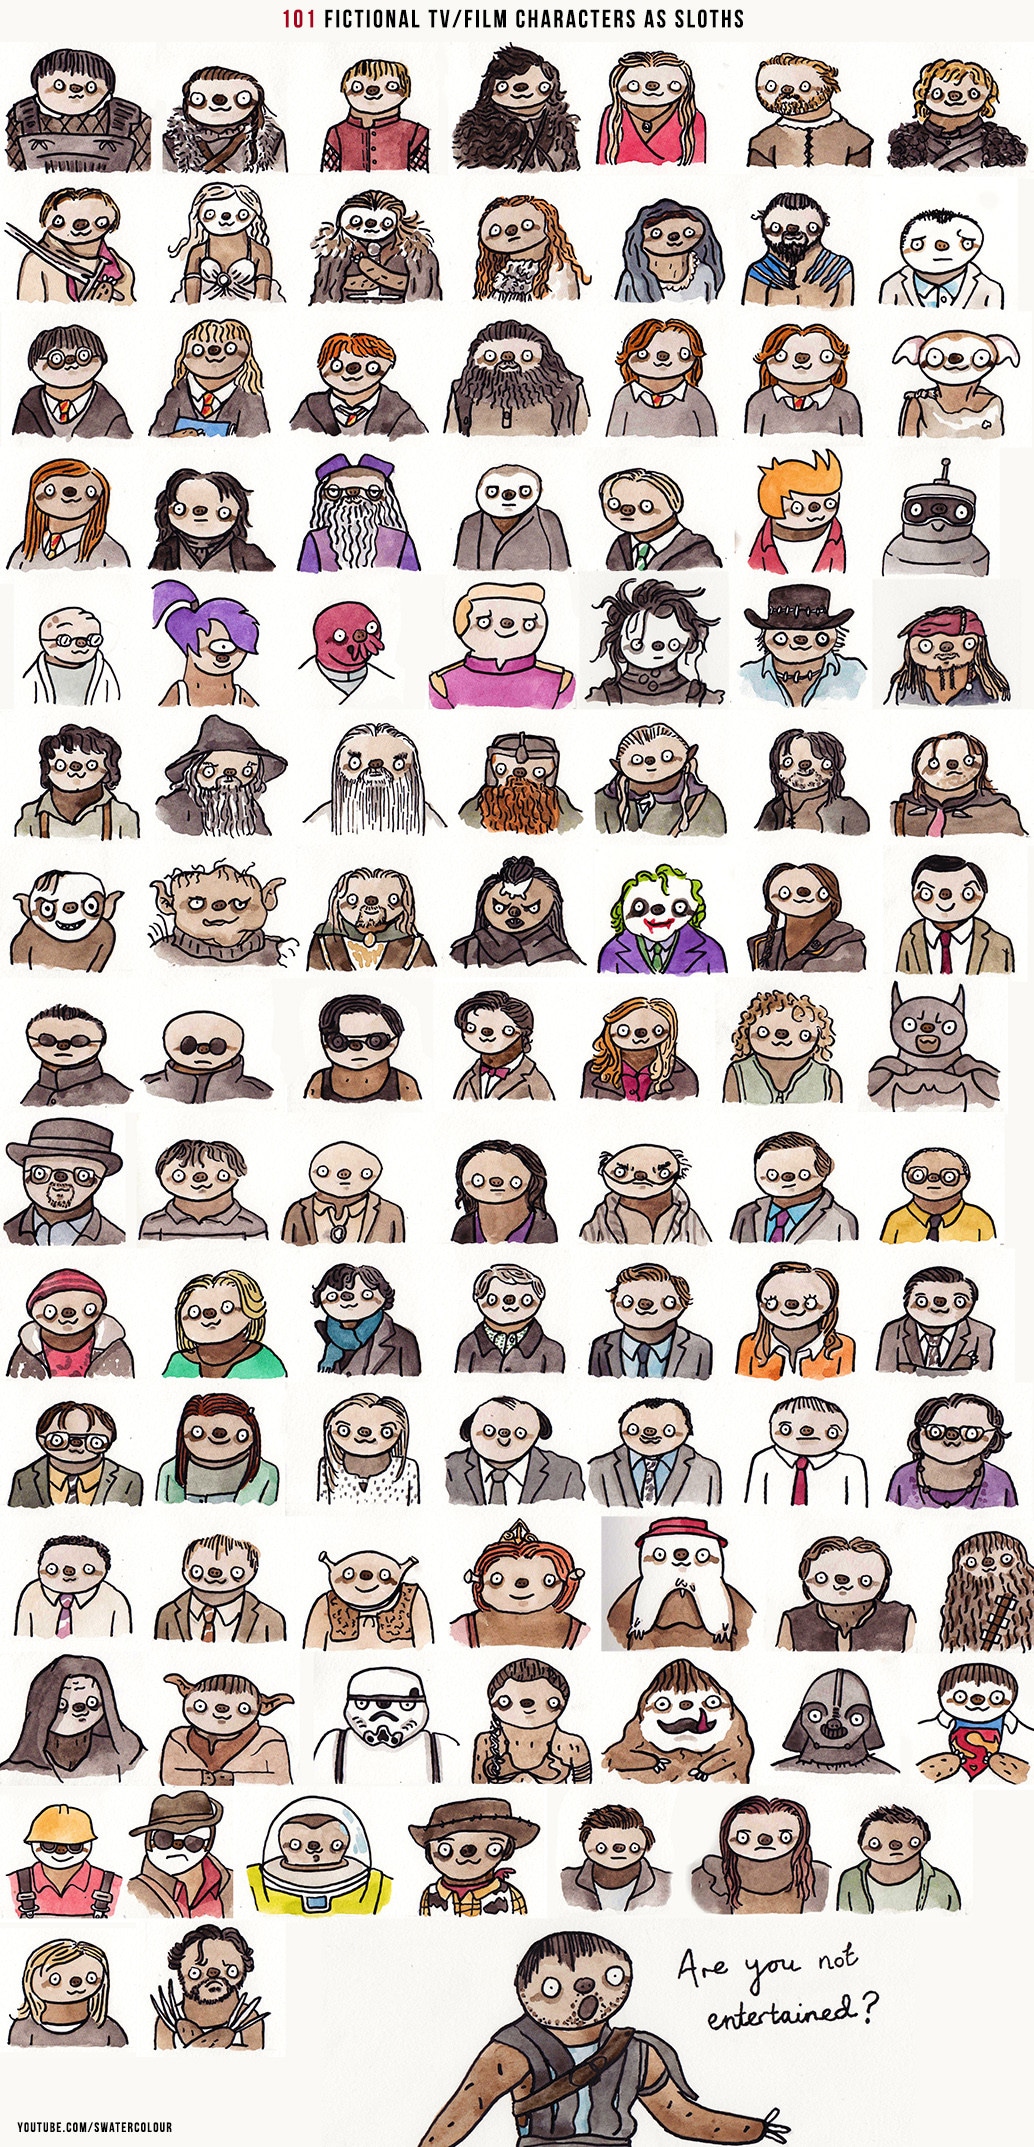 101-characters-as-sloths-chart